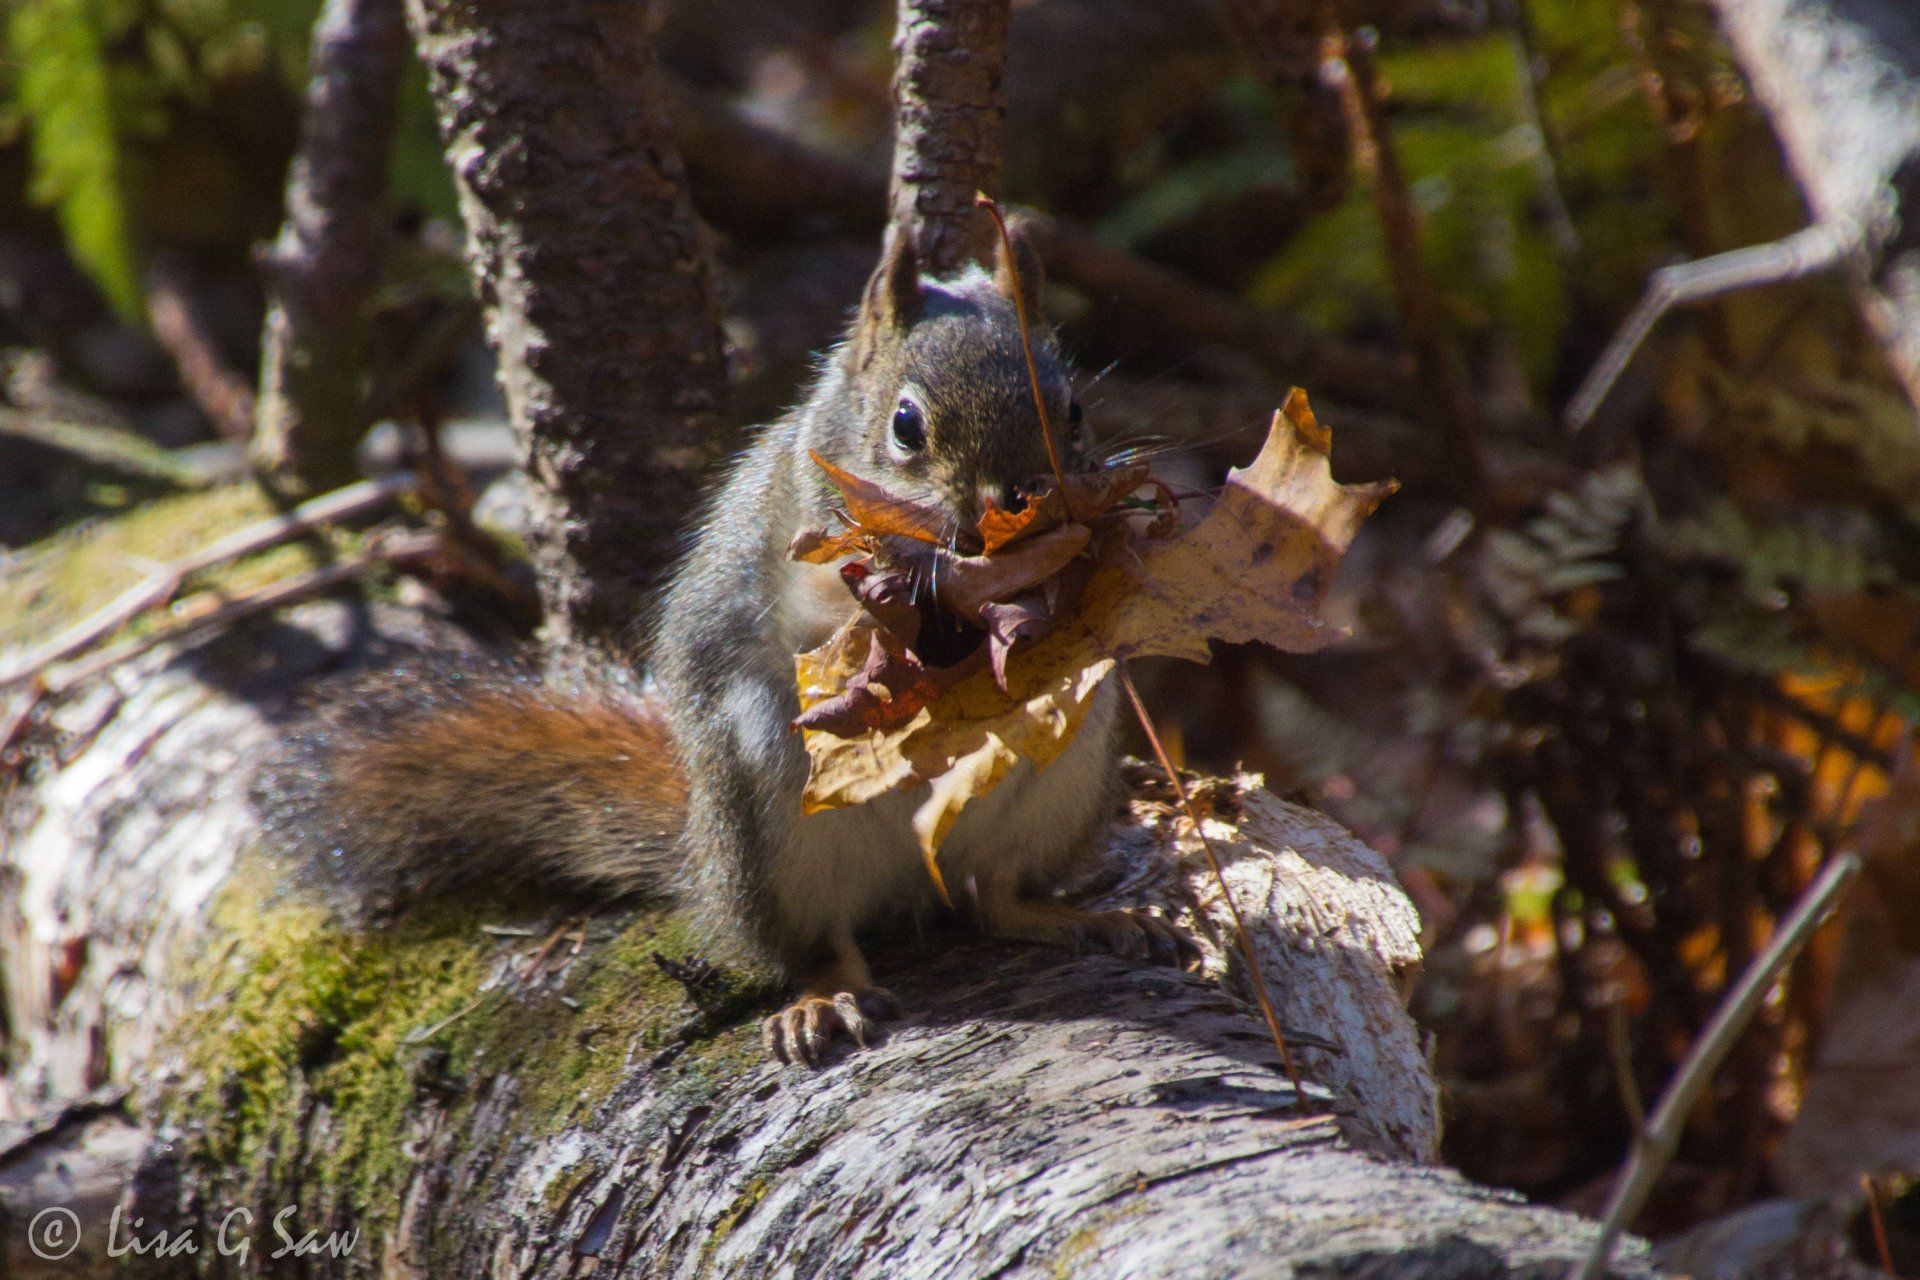 Squirrel stuffing leaves into its mouth